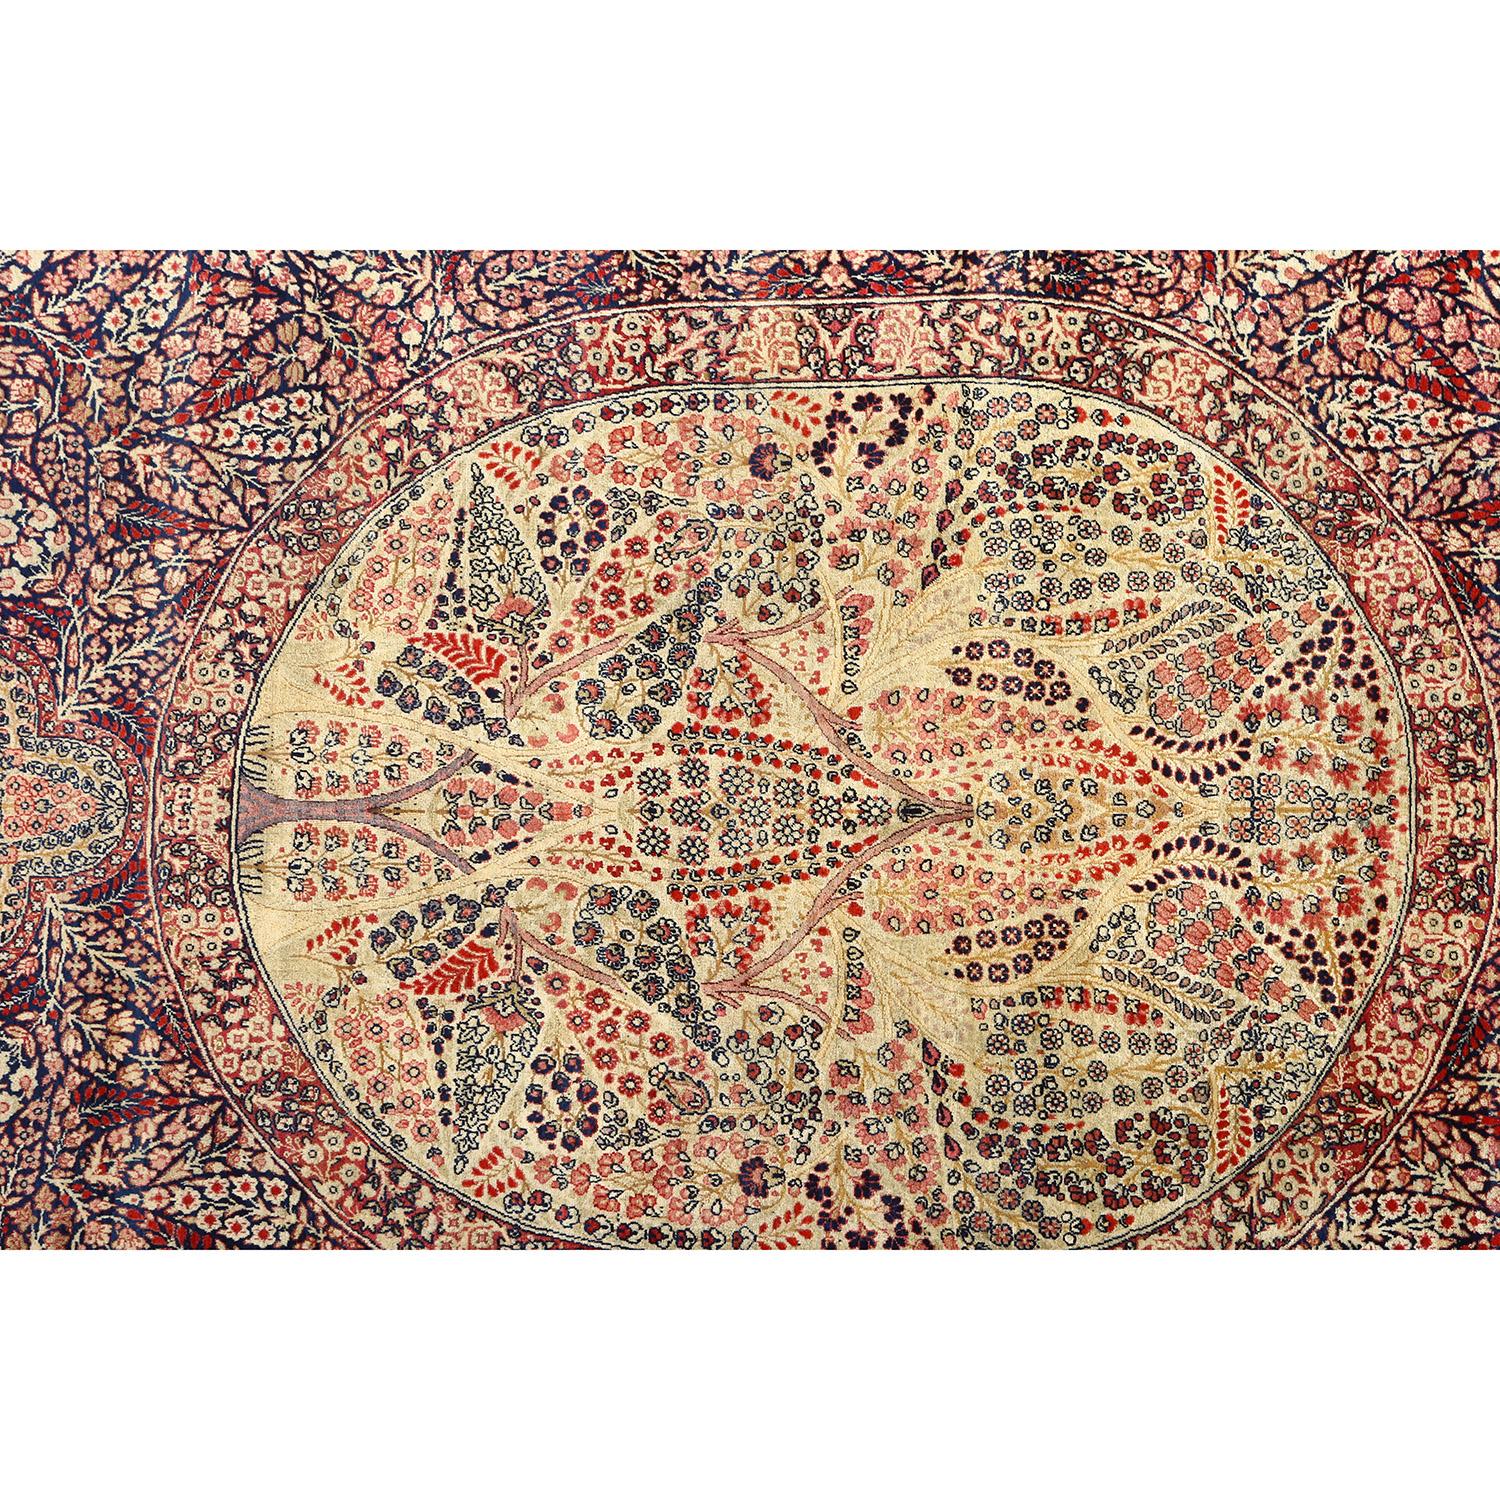 Antique Persian Lavar Pair - Size: 7 ft 10 in x 4 ft 9 in In Excellent Condition For Sale In Los Angeles, CA